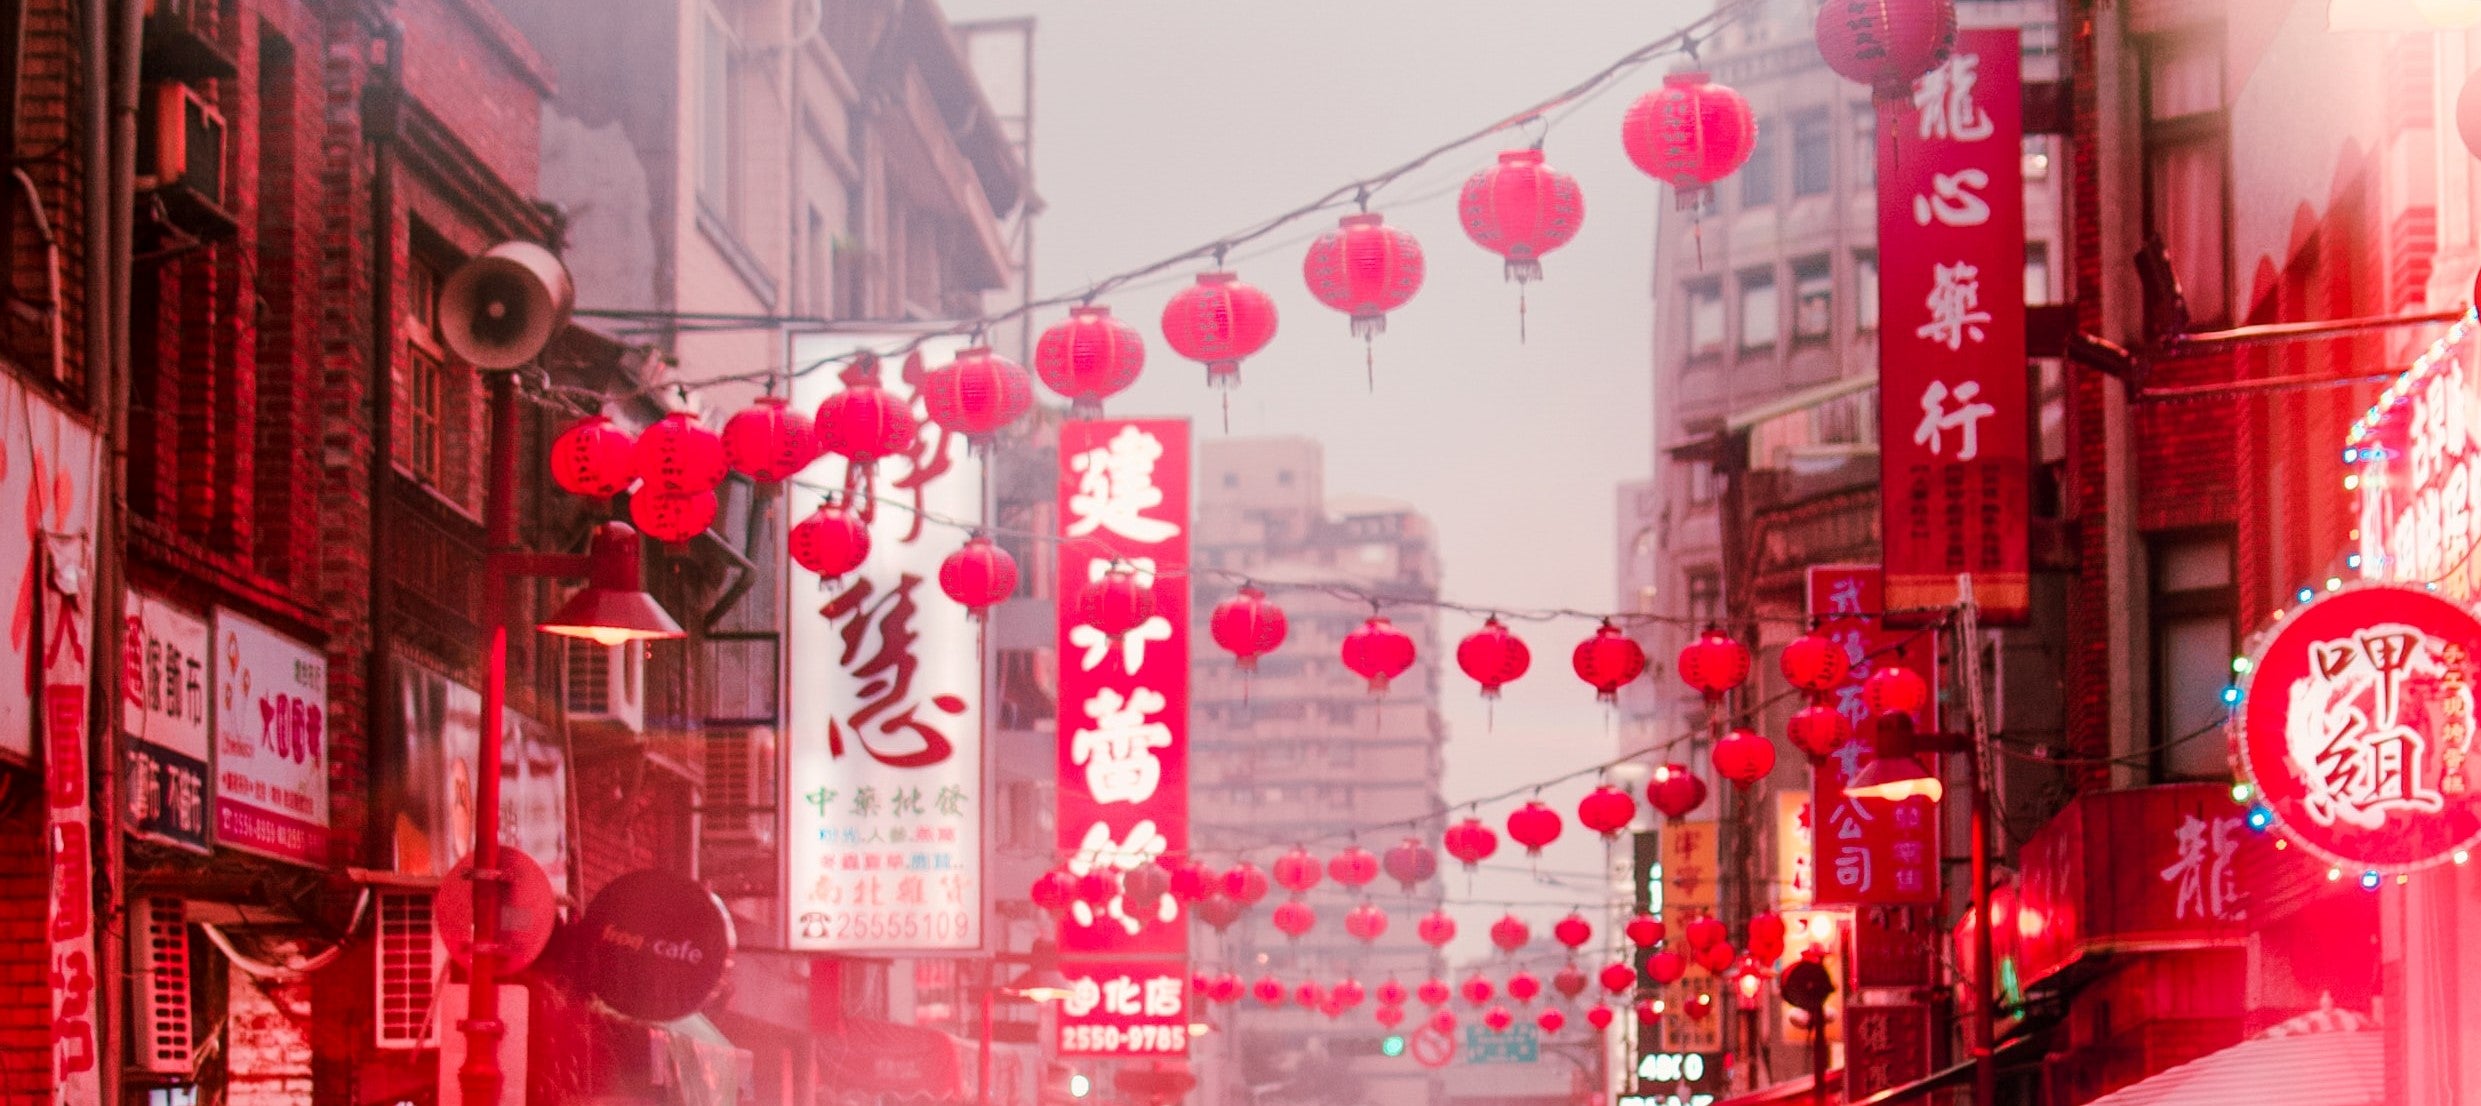 Ecosusi Lunar New Year Inspiration   -Culture, Tones of Colors & Sense of Atmosphere